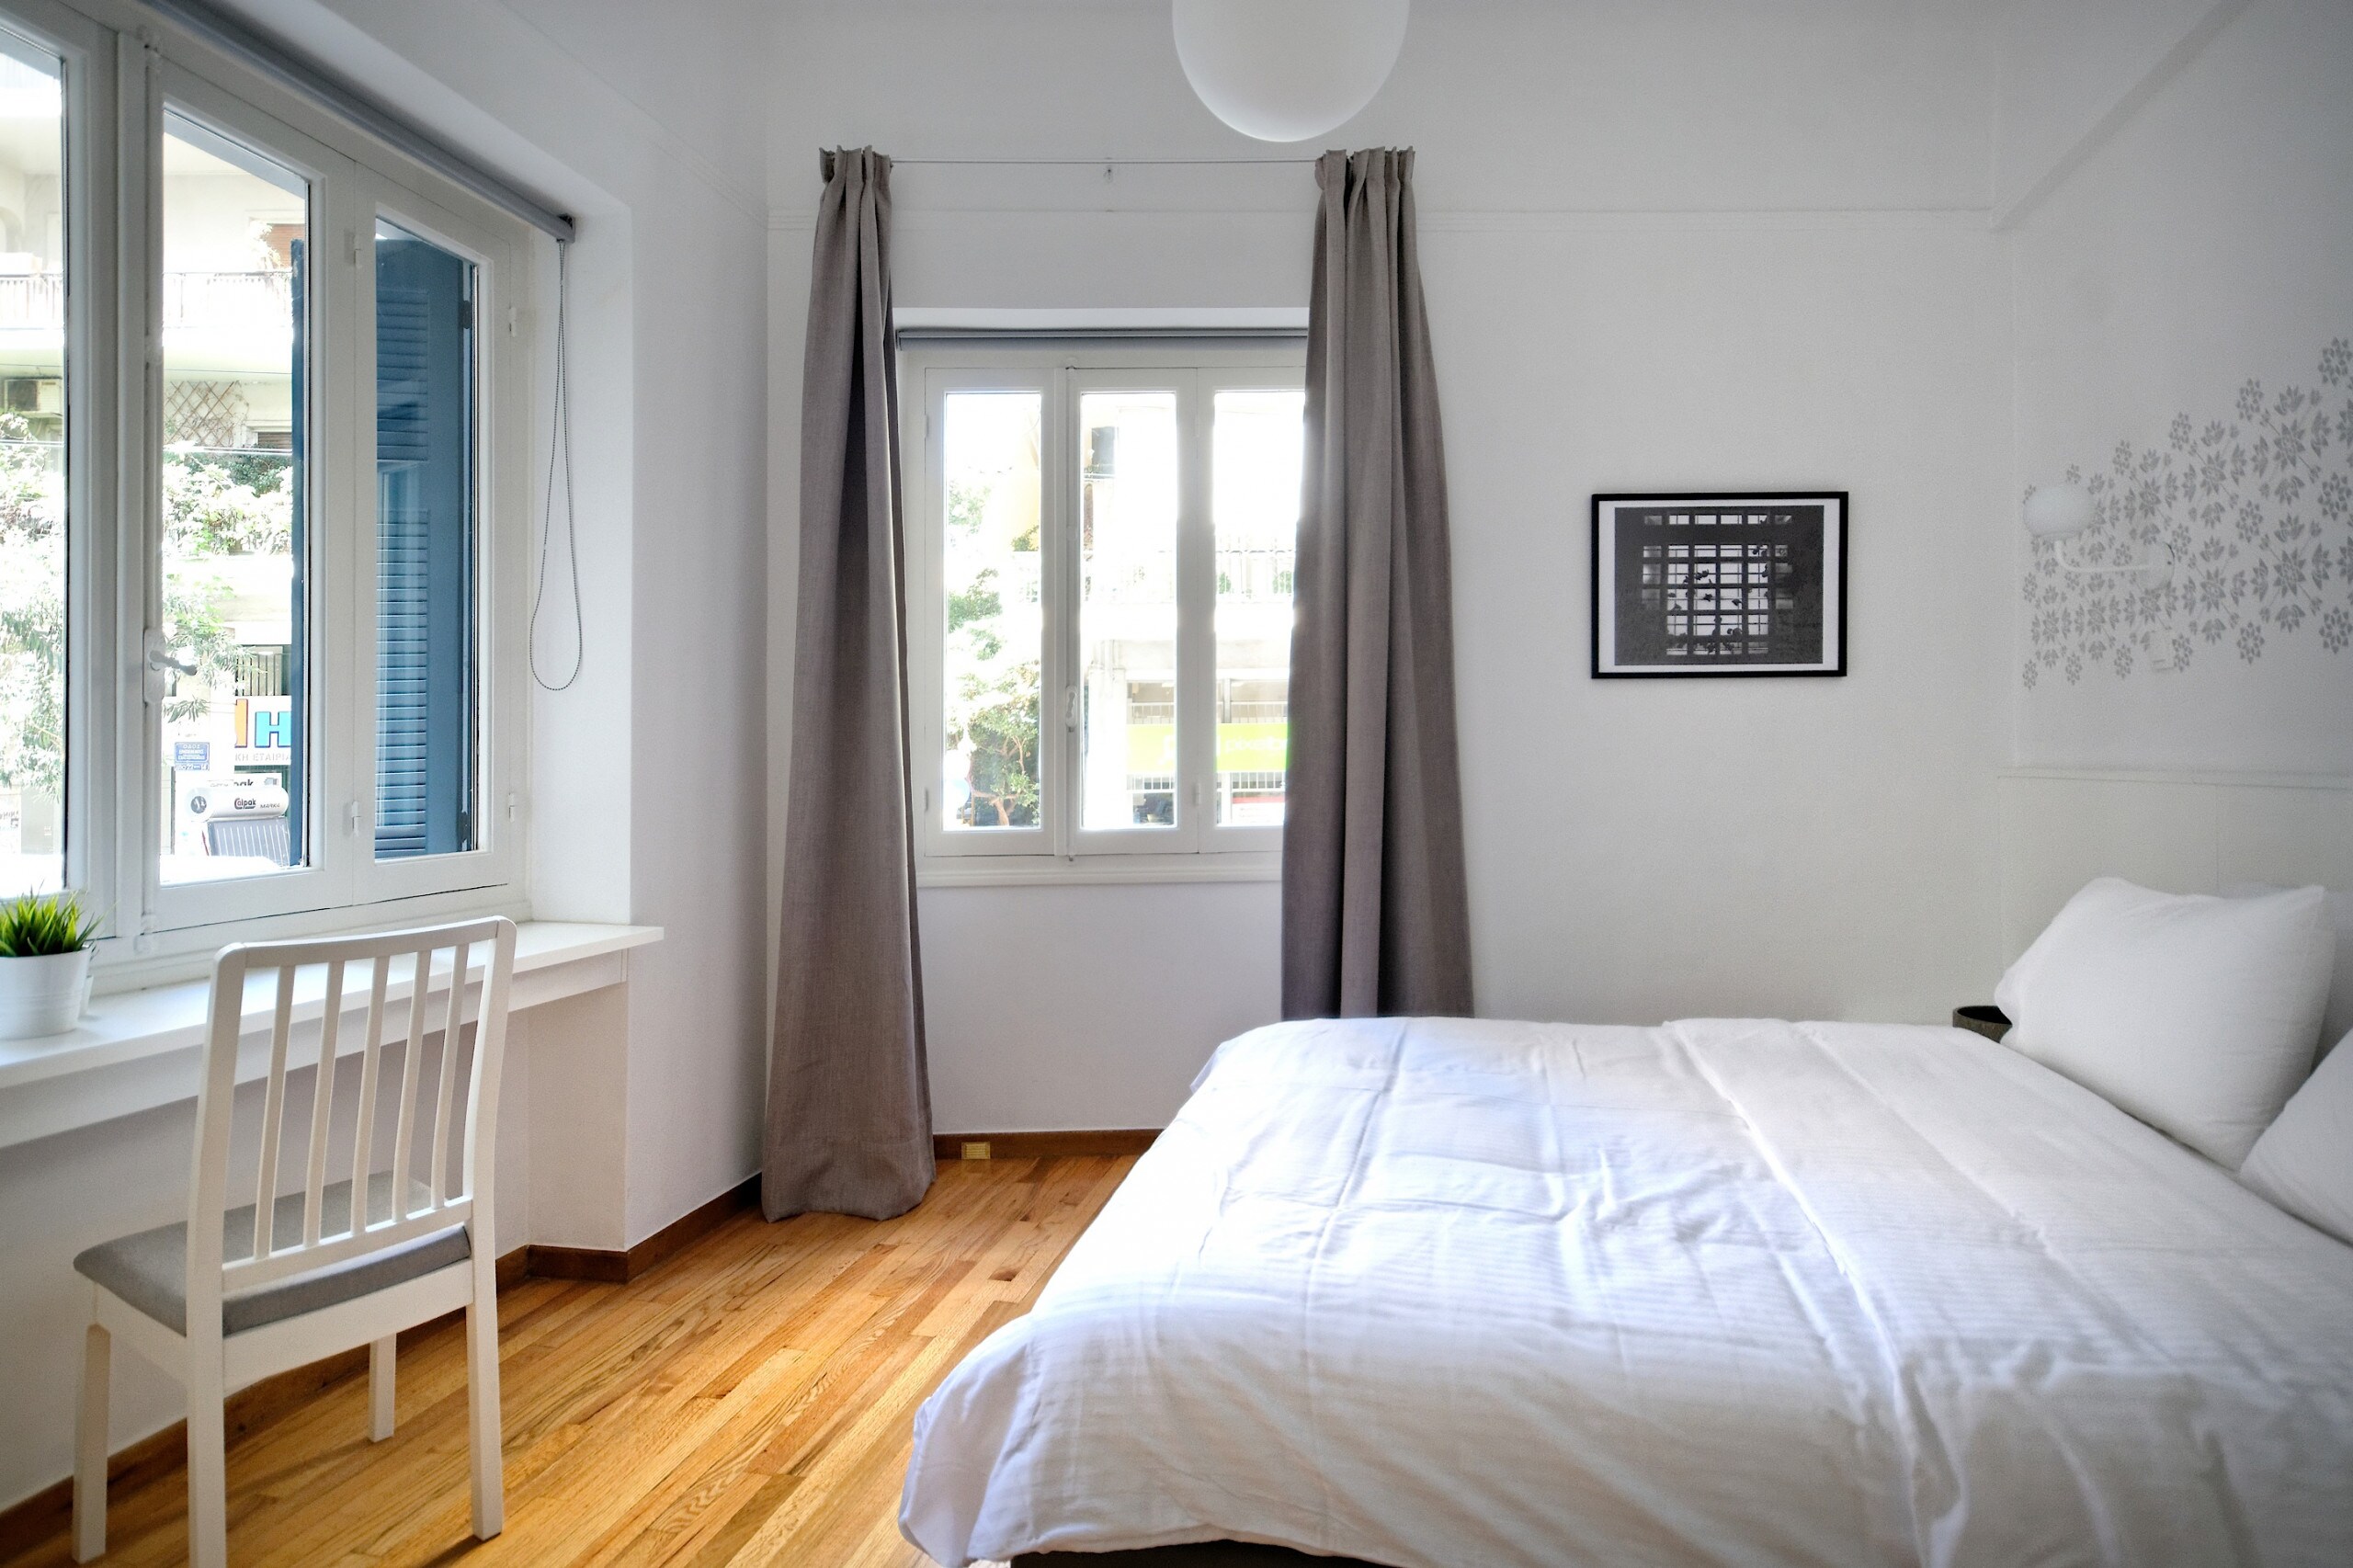 Property Image 2 - Art In Athens 4 bedrooms apartment, close to Goulandri Modern Art Museum In Pagrati